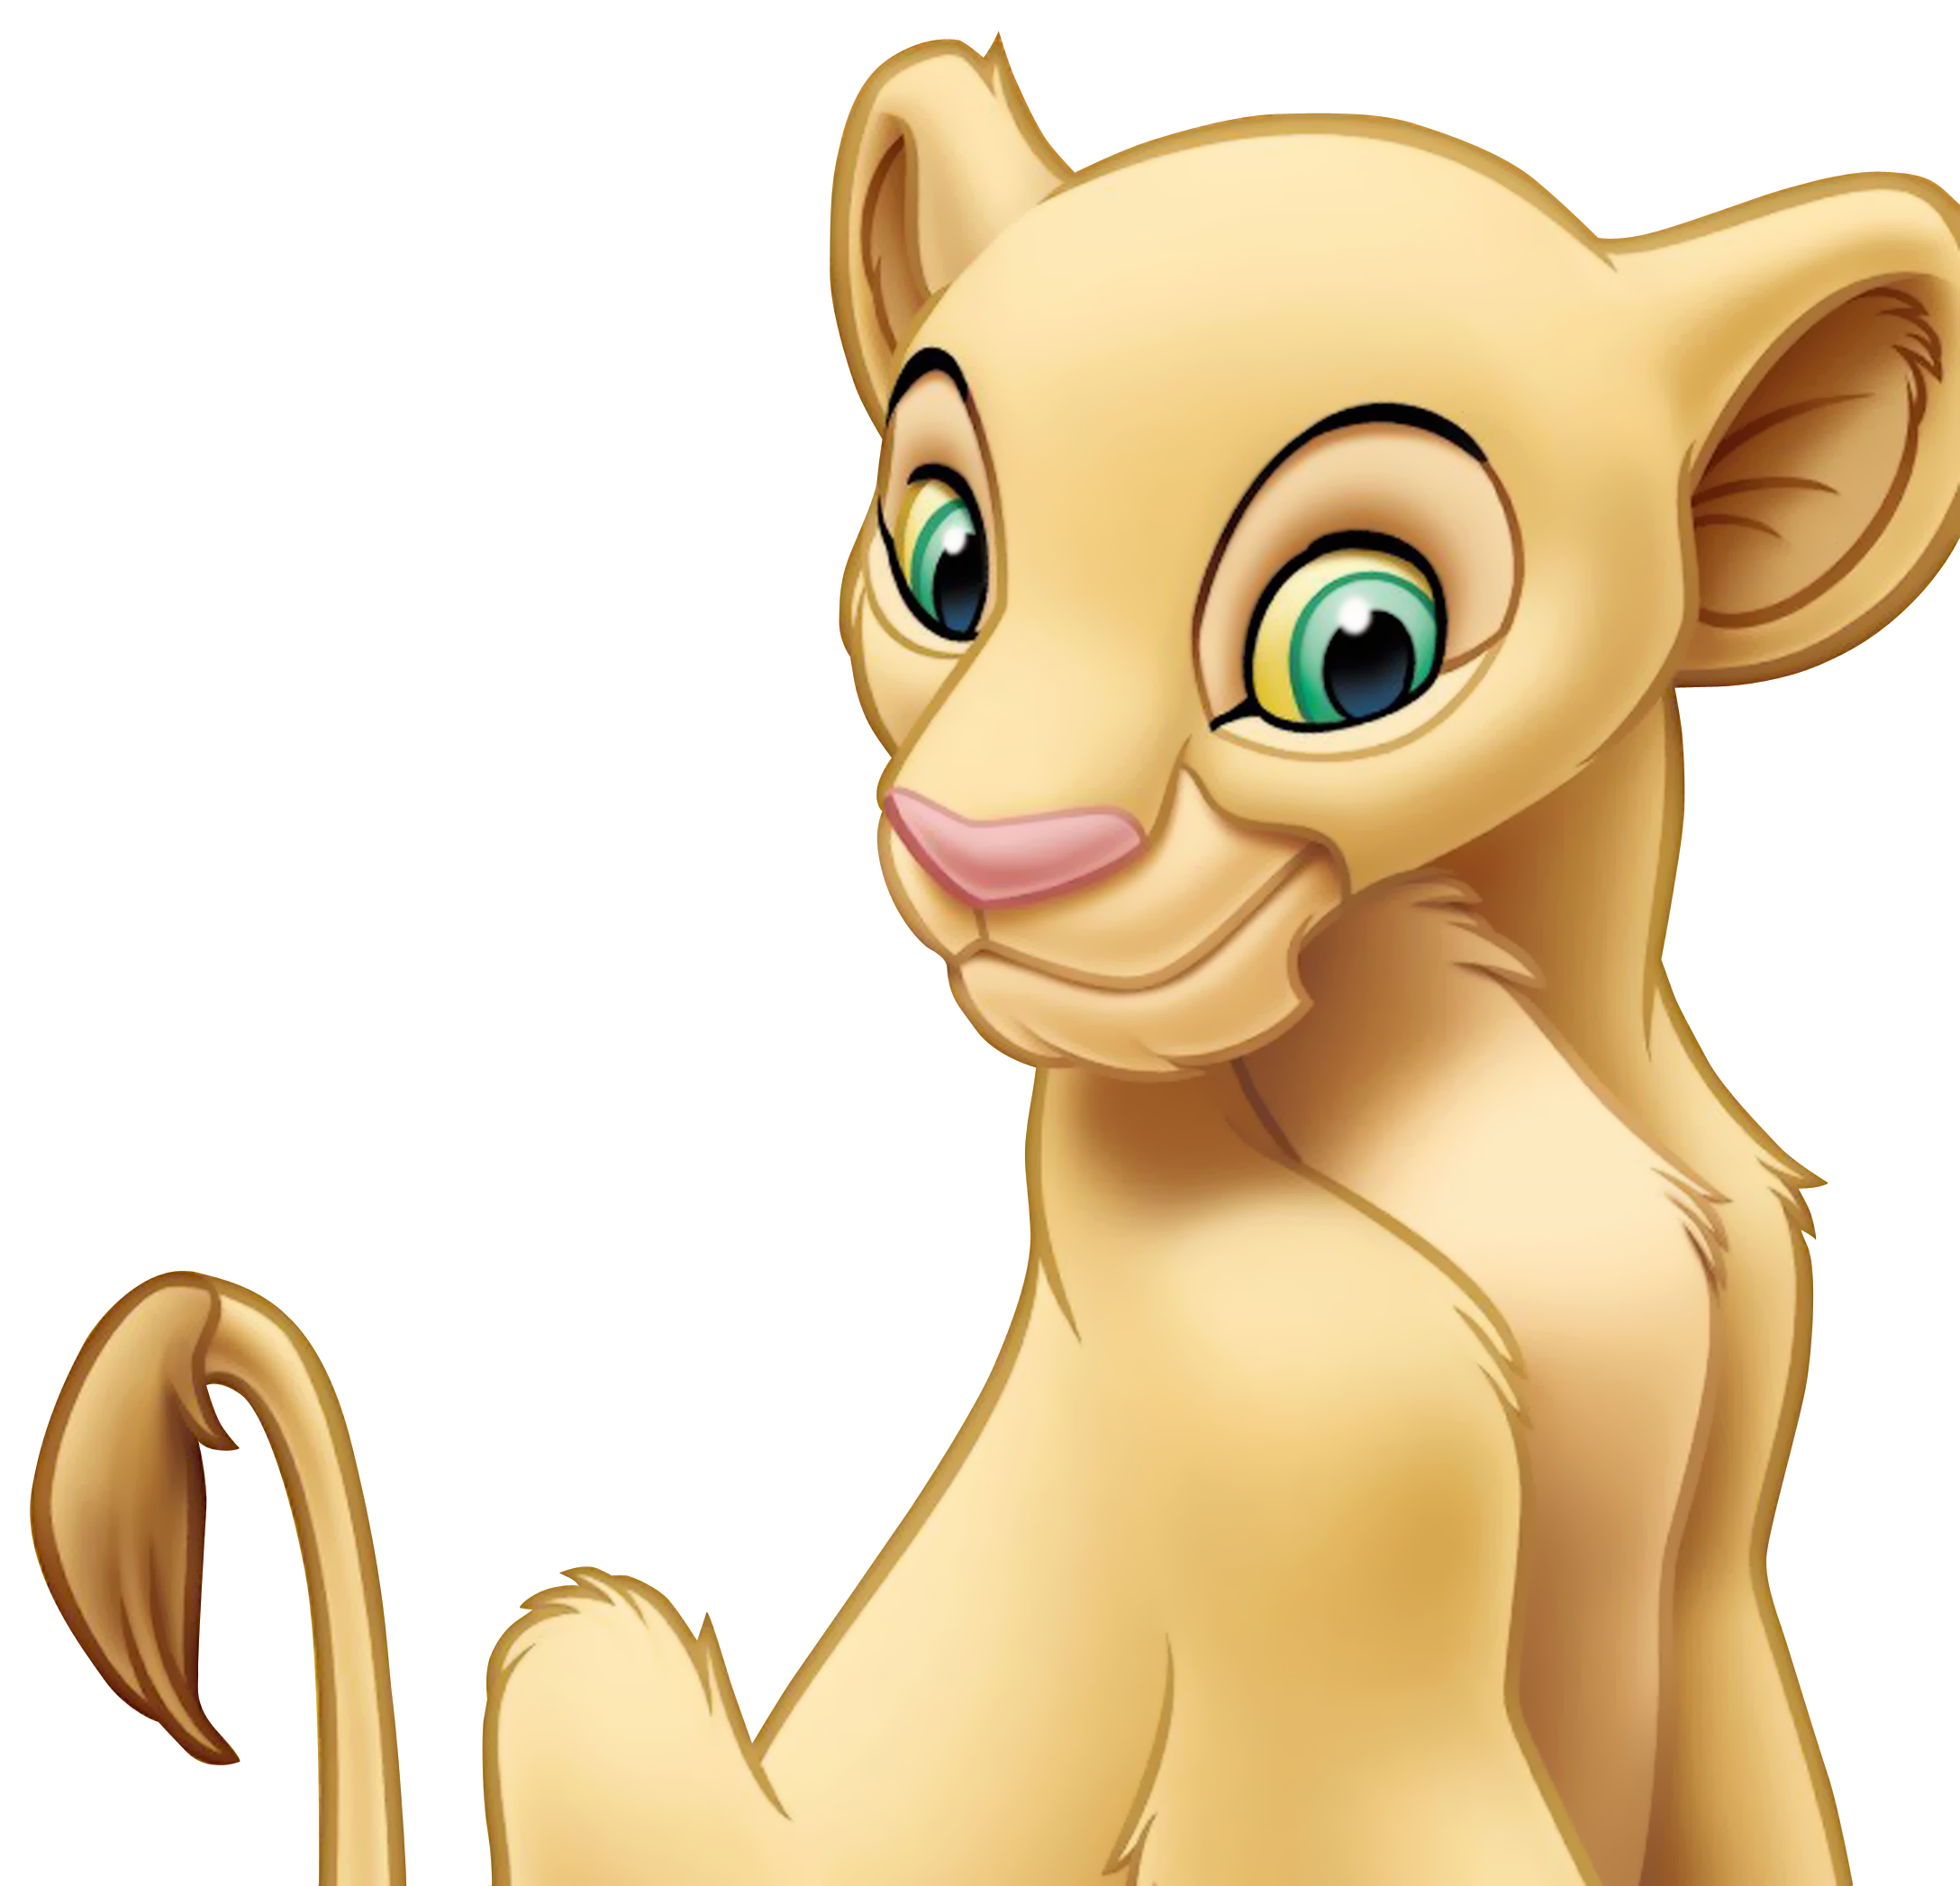 Lion clipart ear. King png image purepng